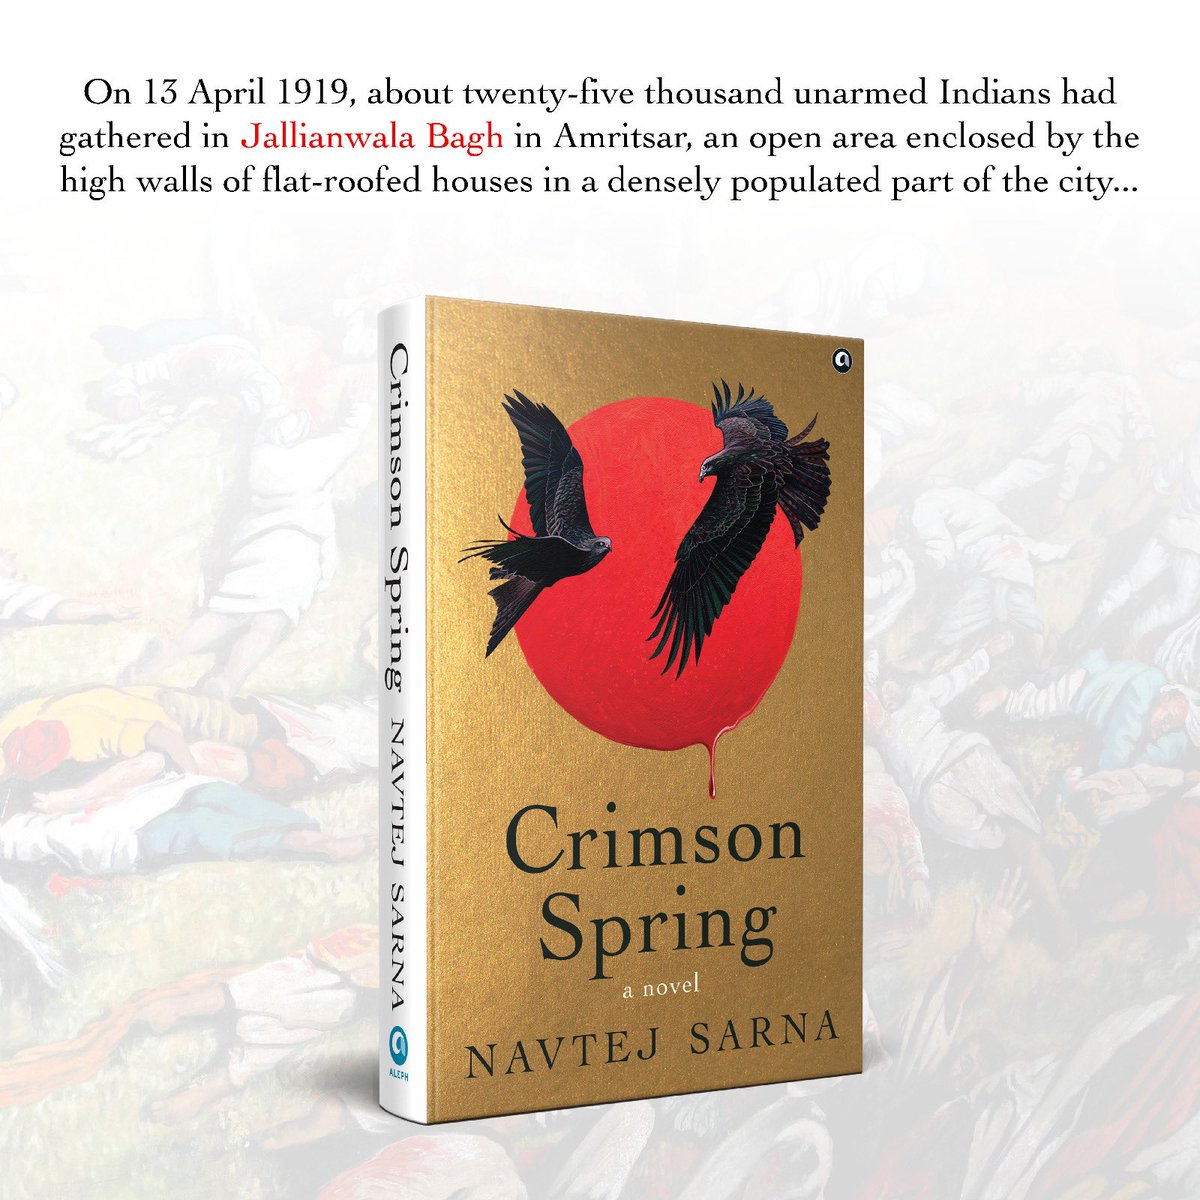 In this masterpiece, @NavtejSarna brings the horror of the Jallianwala Bhag massacre to life by viewing it through the eyes of nine characters—Indians and Britons, ordinary people and powerful officials, the innocent and the guilty, whose lives are changed forever by the events…